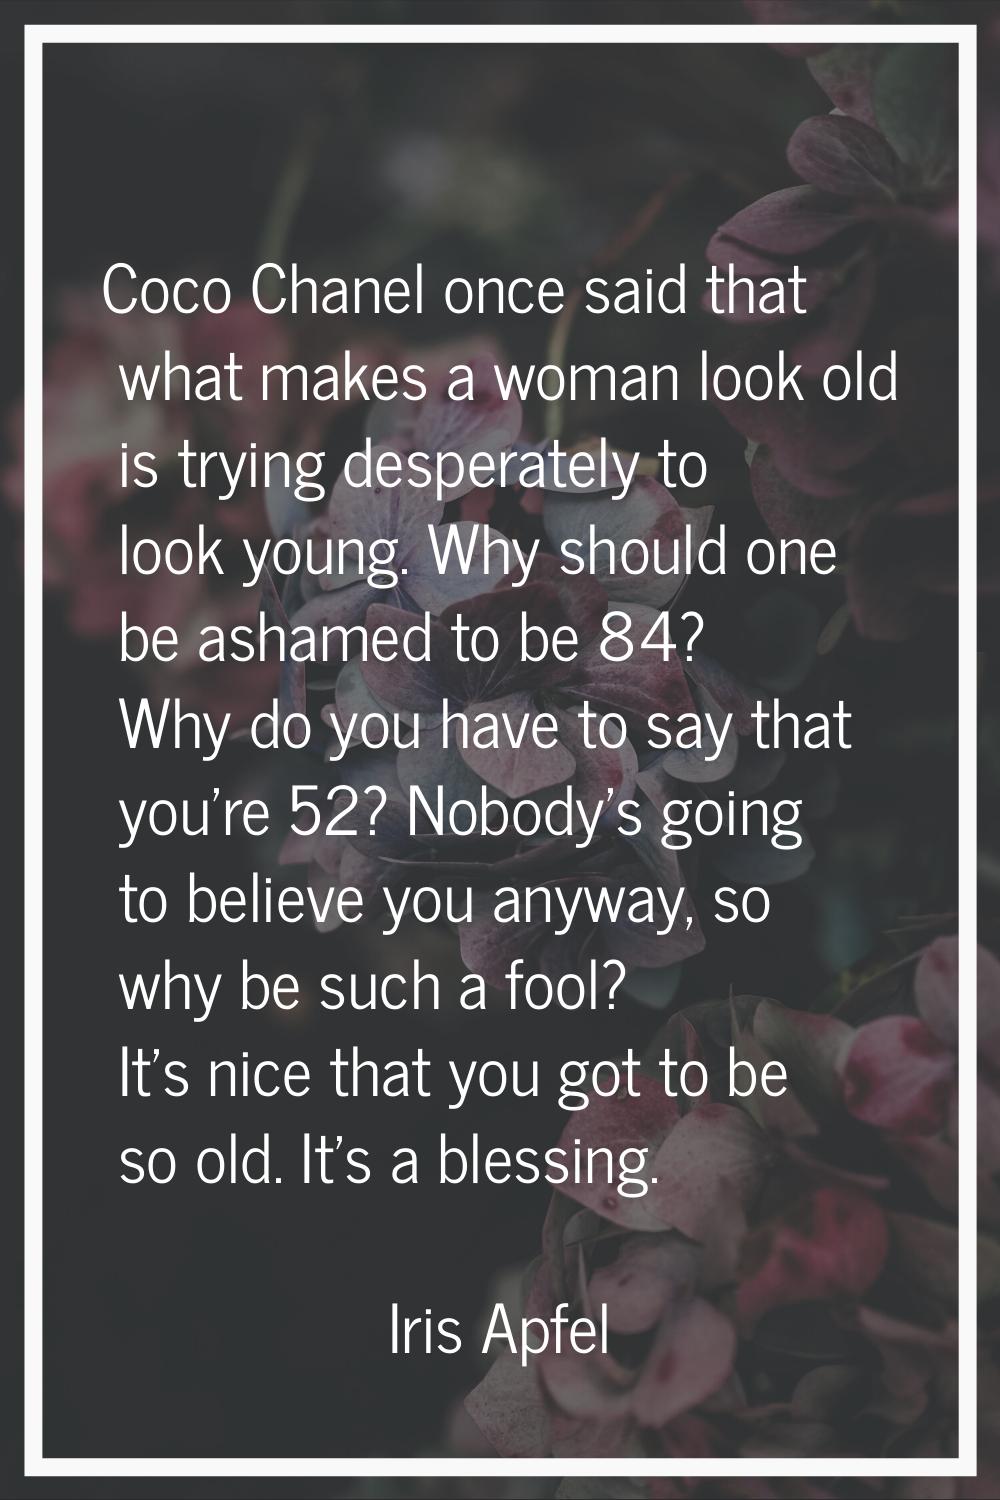 Coco Chanel once said that what makes a woman look old is trying desperately to look young. Why sho